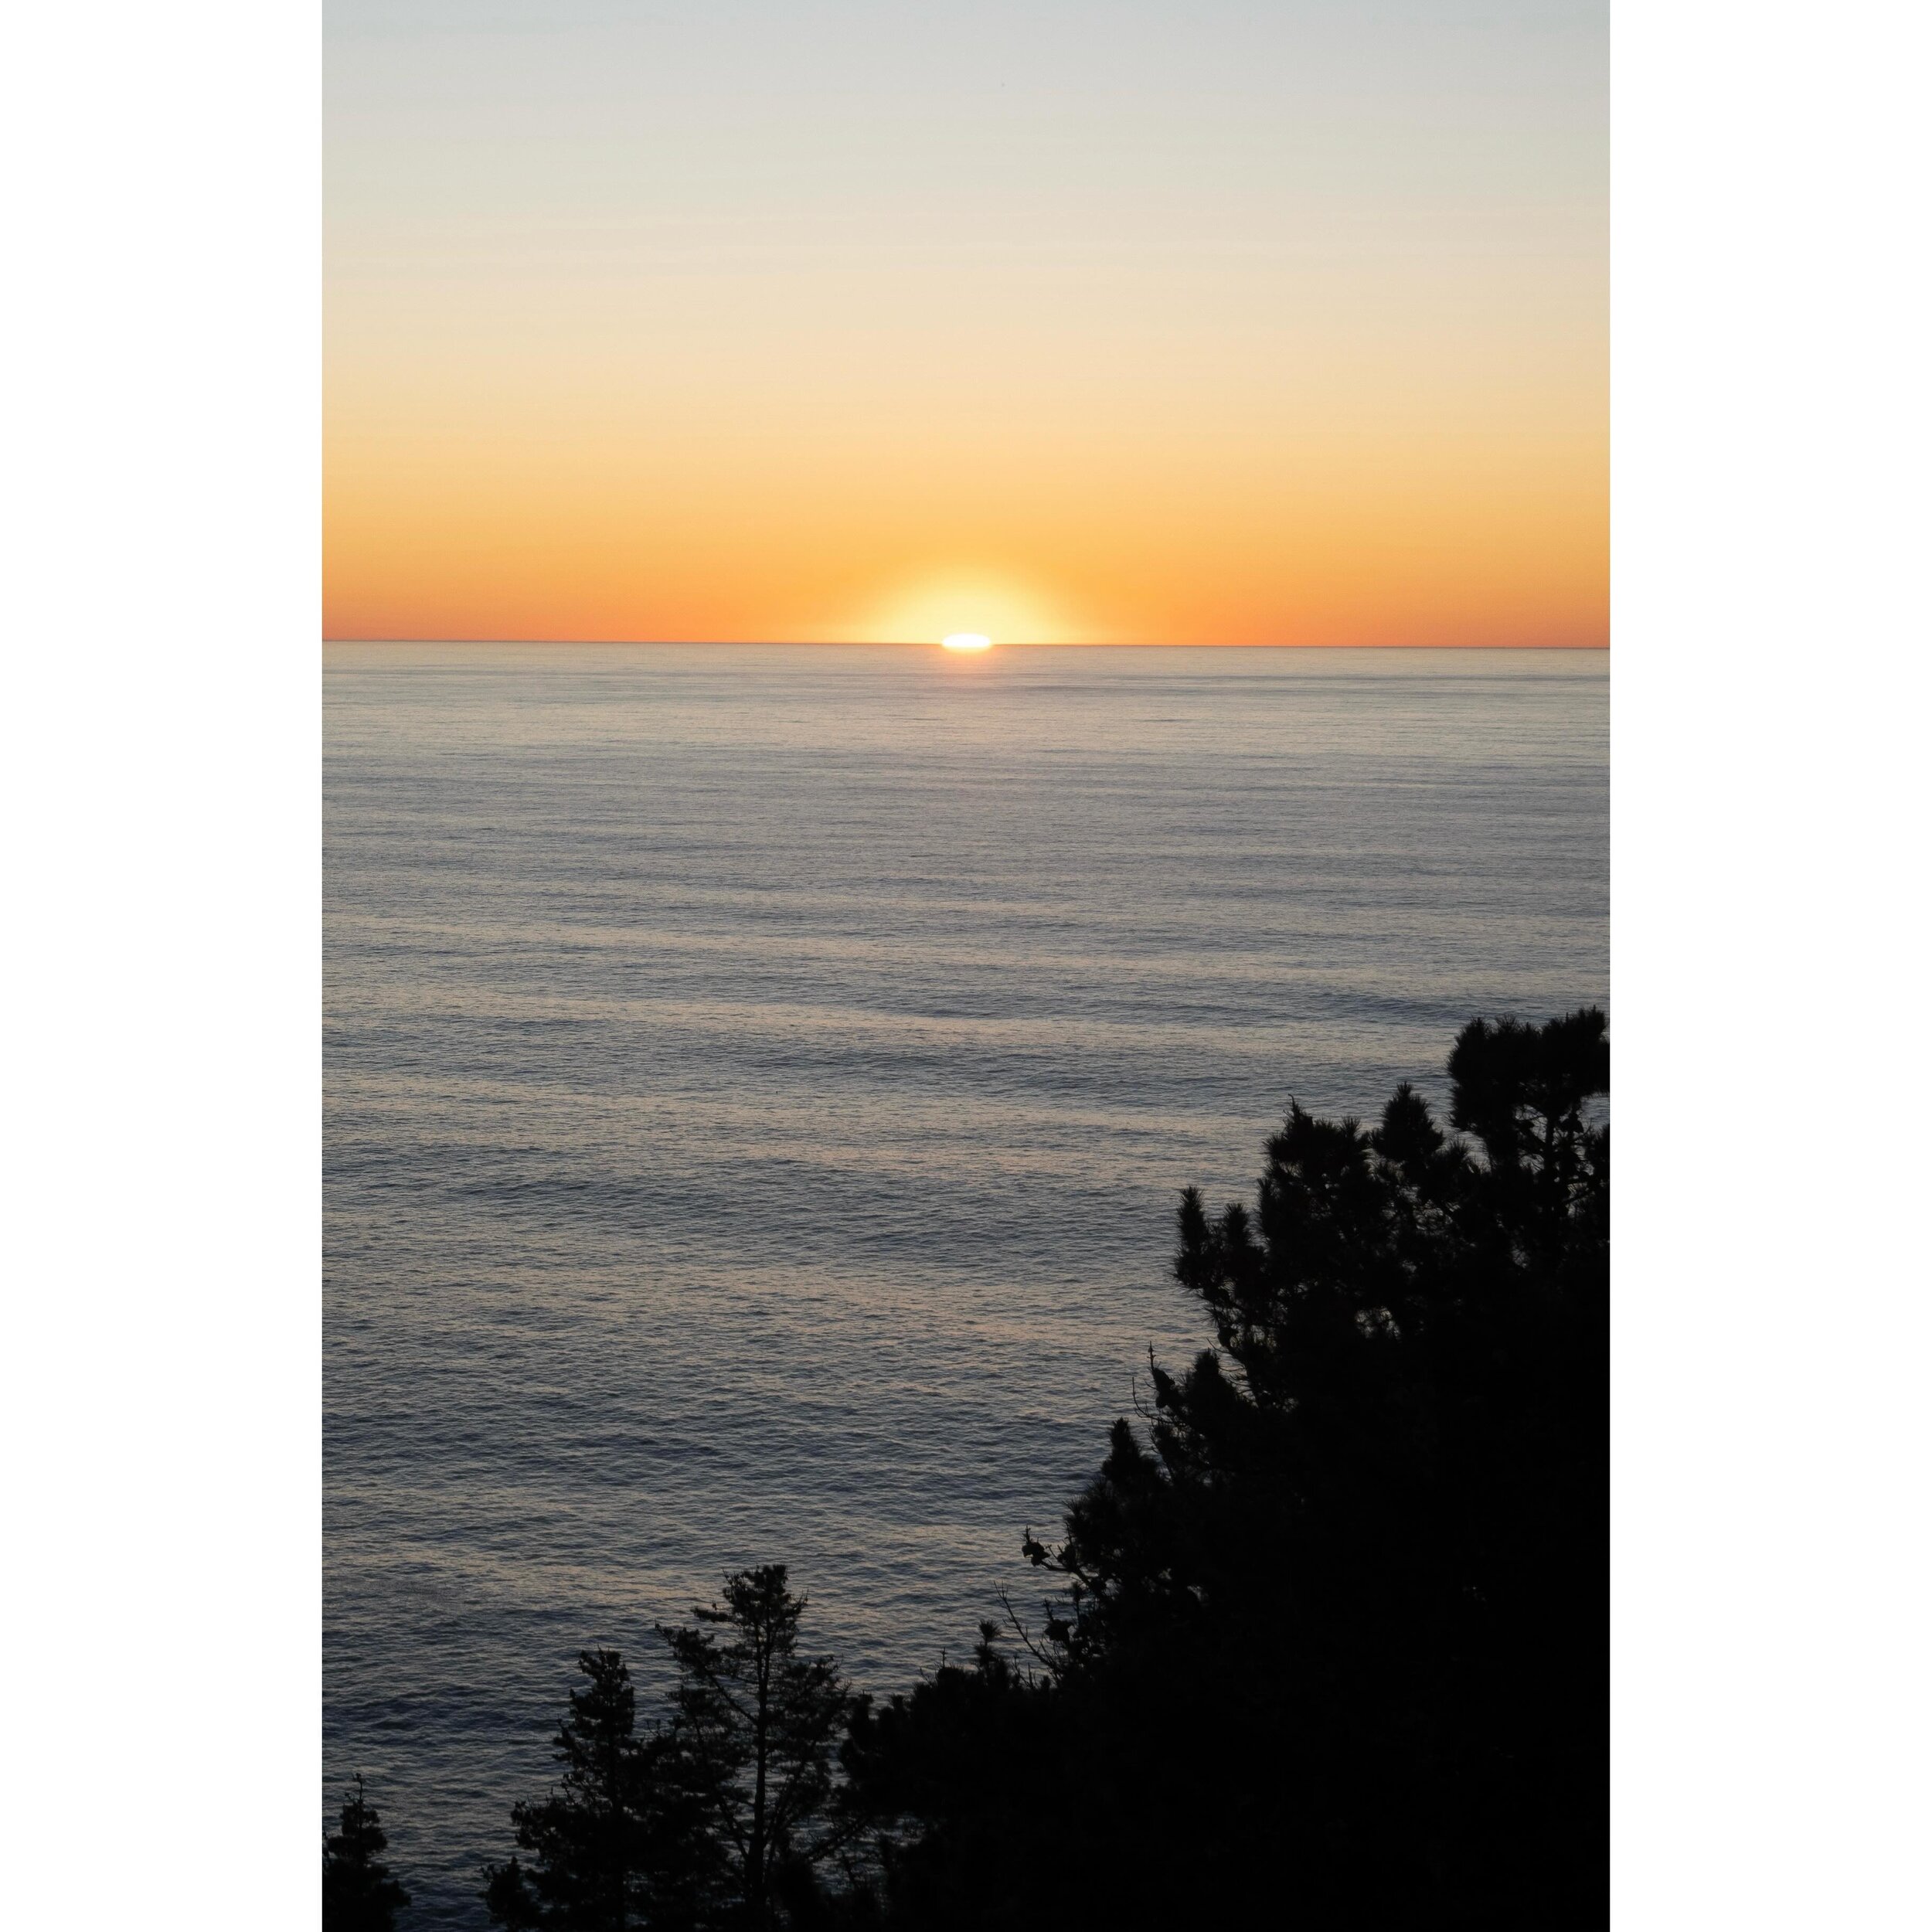 No filter needed - your view of the sunset from the deck on the Autonomous Tent at @treebonesresort.
.
.
.
.
.
 #bigsur #sunset #saltlife #staysalty #sealife #water_of_our_world #madeofocean #welivetoexplore #thewavecave #ic_water #livingonearth #off